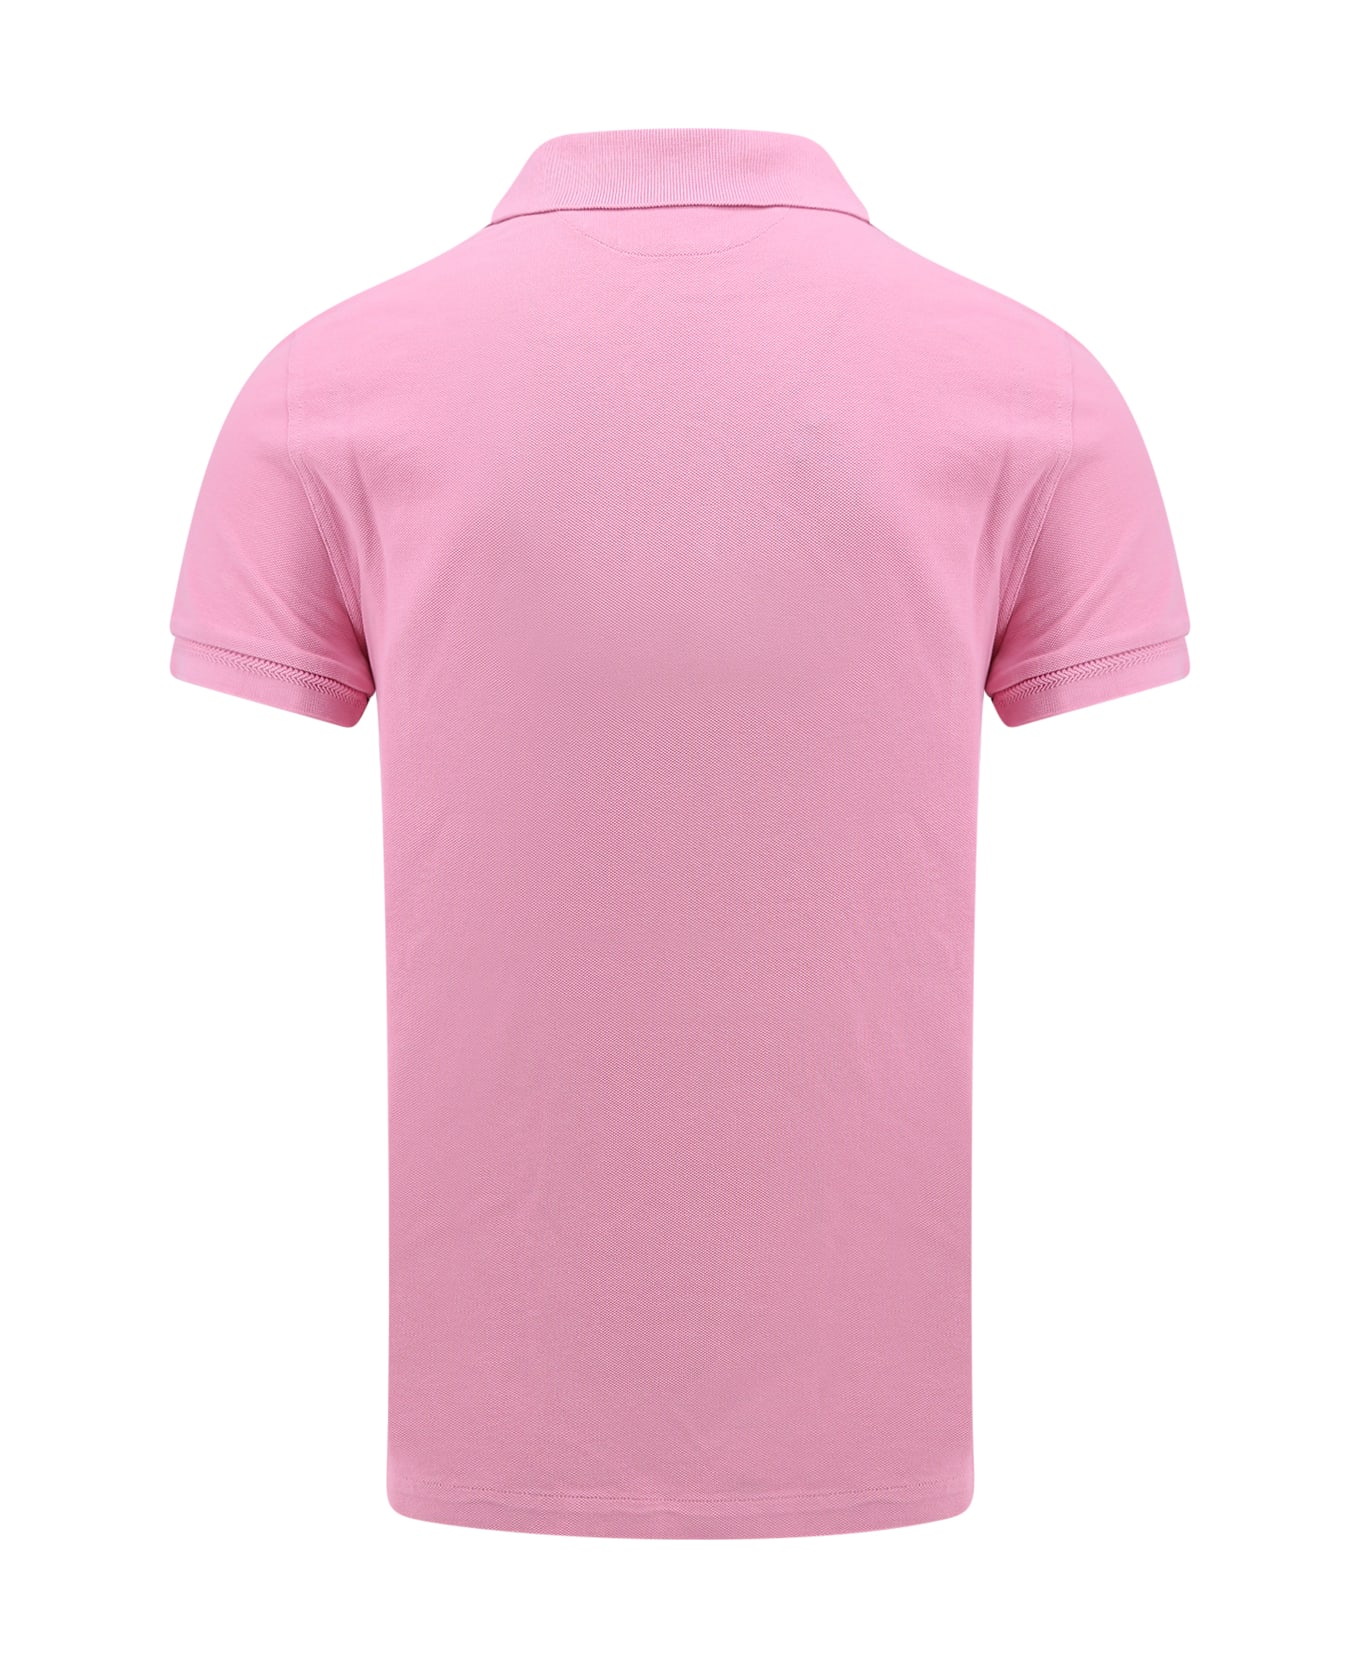 Tom Ford Pink Short-sleeves Polo In Cotton Piquet Jersey Man - Pink ポロシャツ